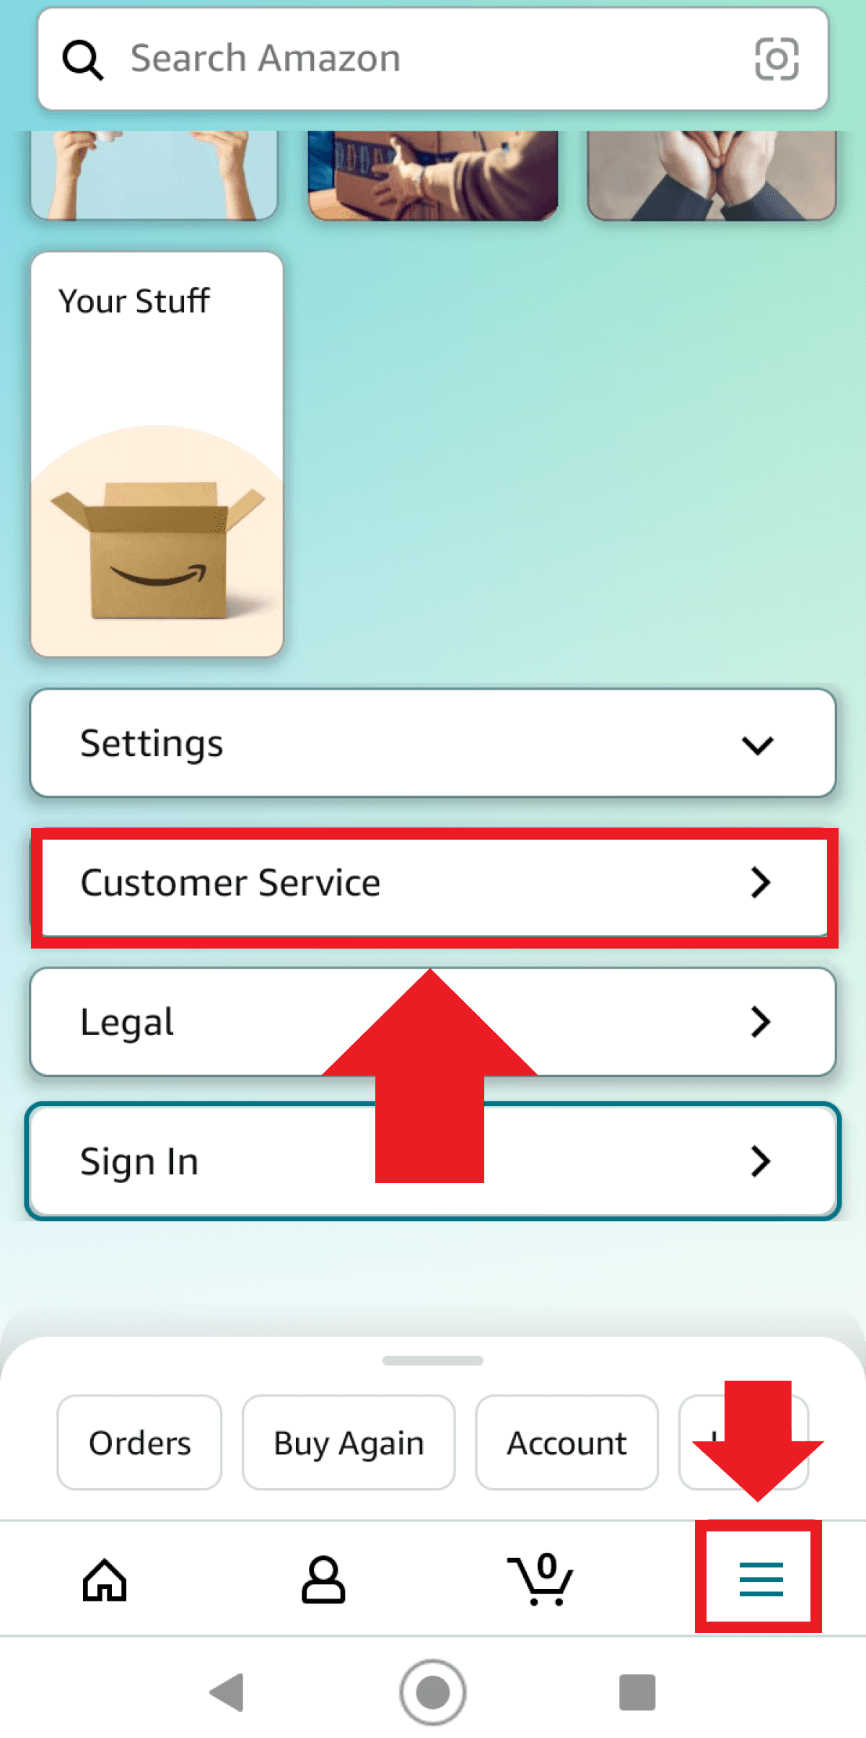 Go to “Customer Service” in the Amazon menu below to start the deletion process.